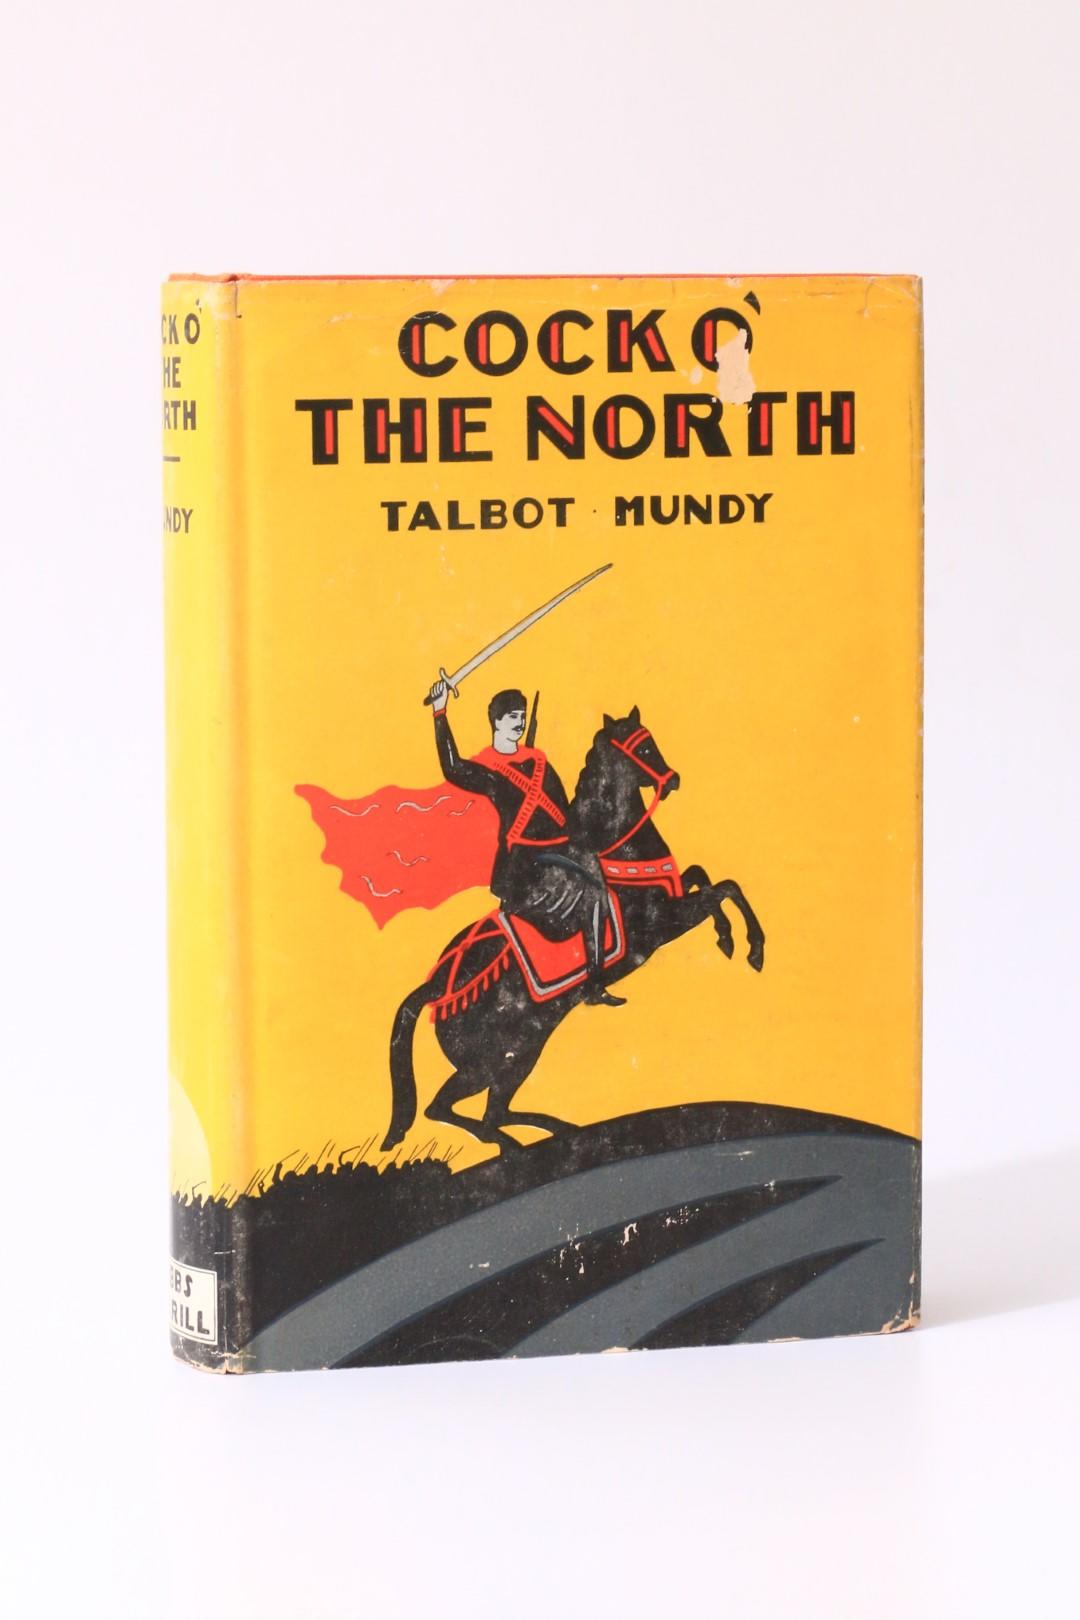 Talbot Mundy - Cock O' The North - Bobbs-Merrill, 1929, First Edition.